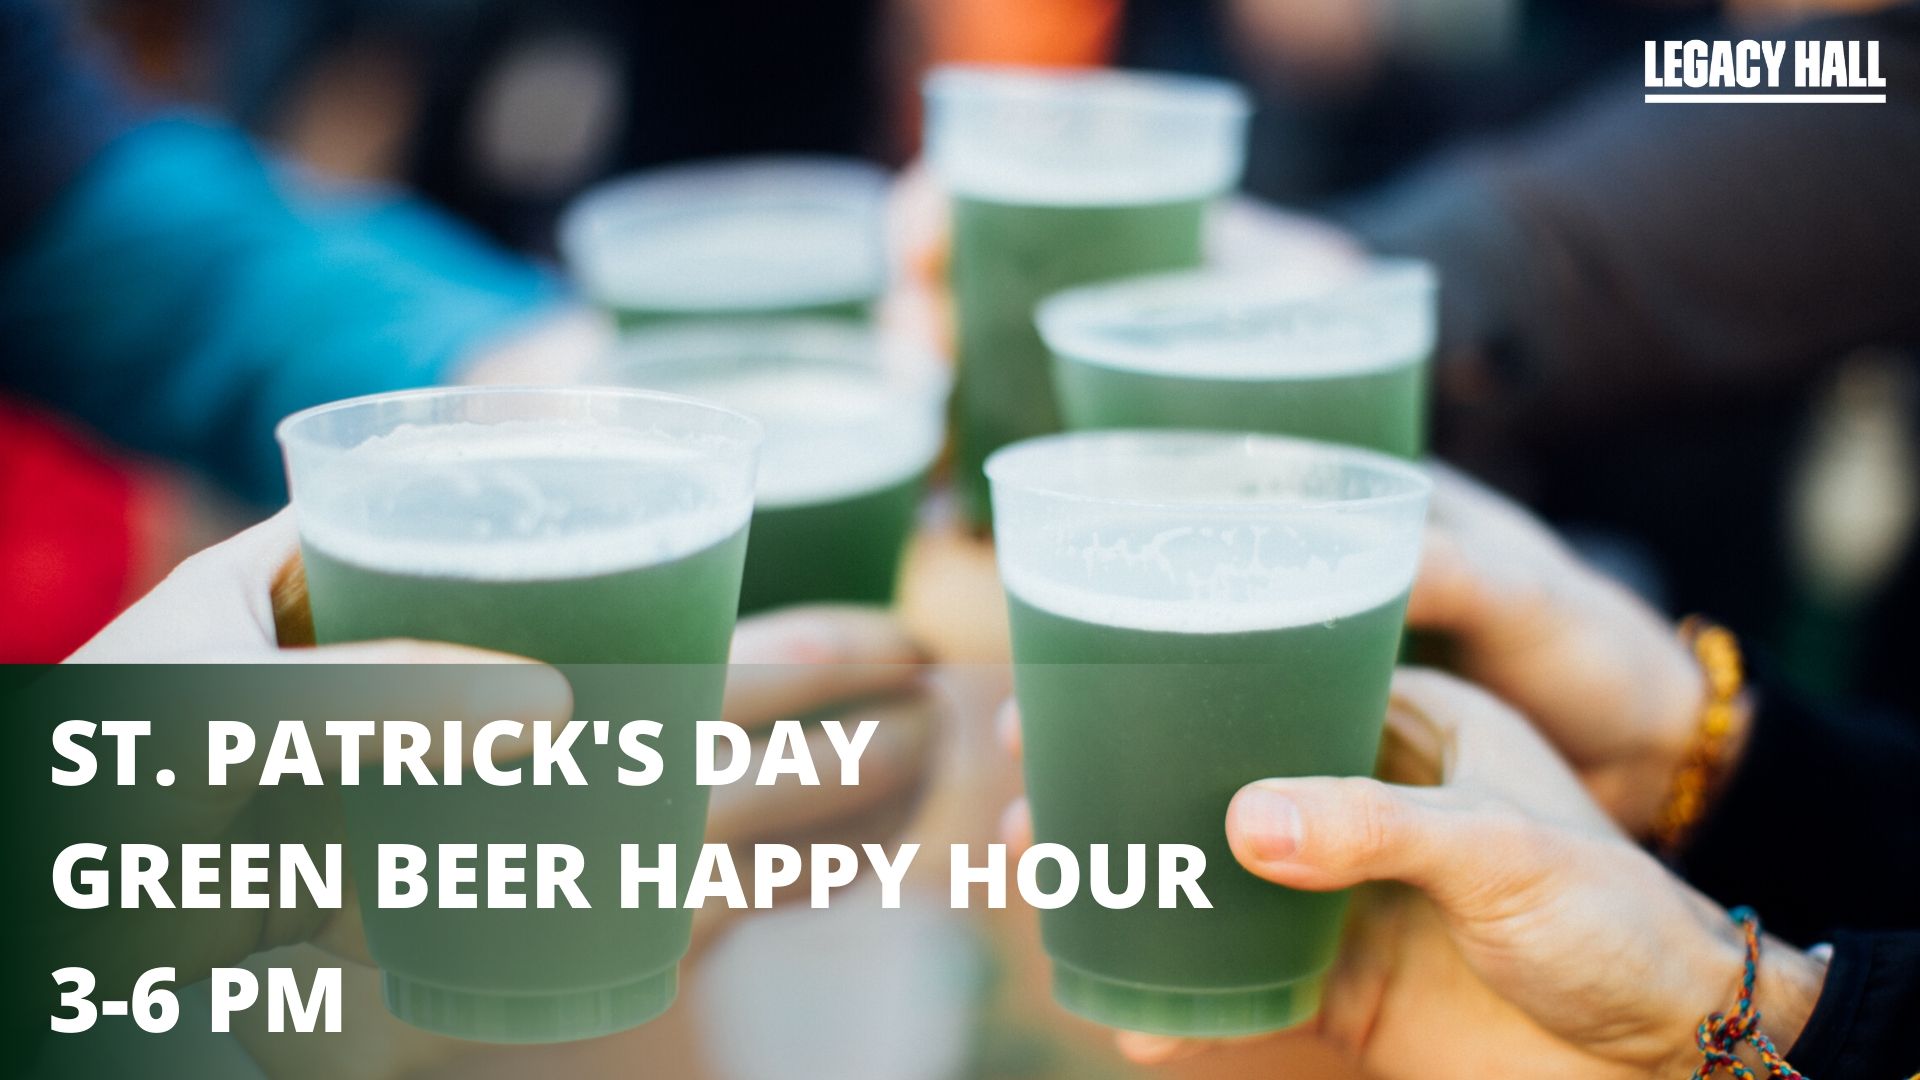 Green Beer Happy Hour at Legacy Hall - hero